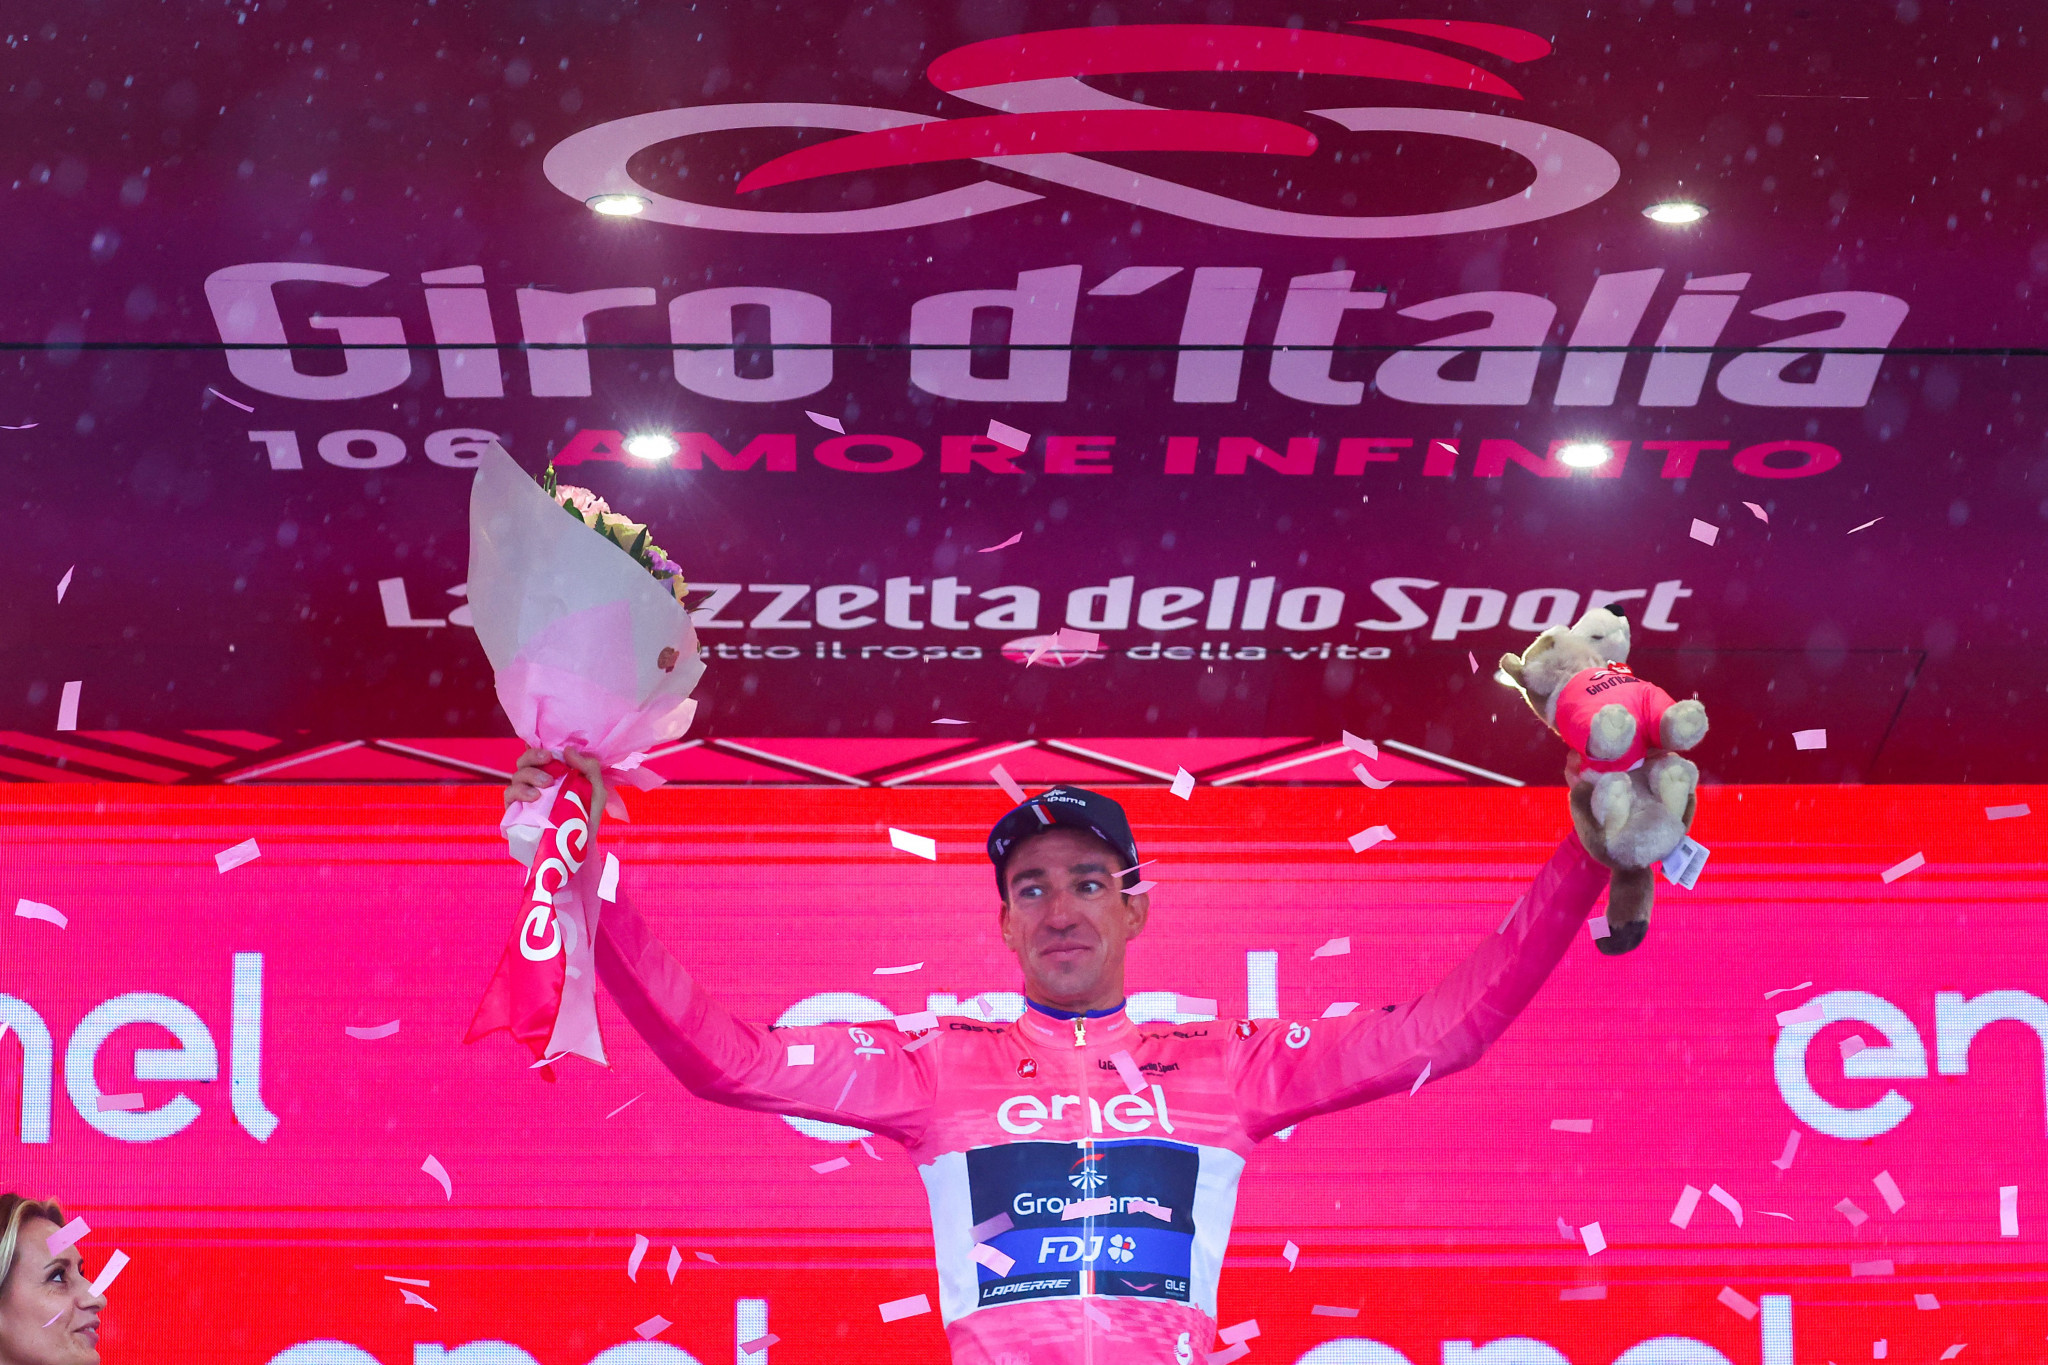 France's Bruno Armirail became the surprise general classification leader after the 14th stage of the Giro d'Italia ©Getty Images